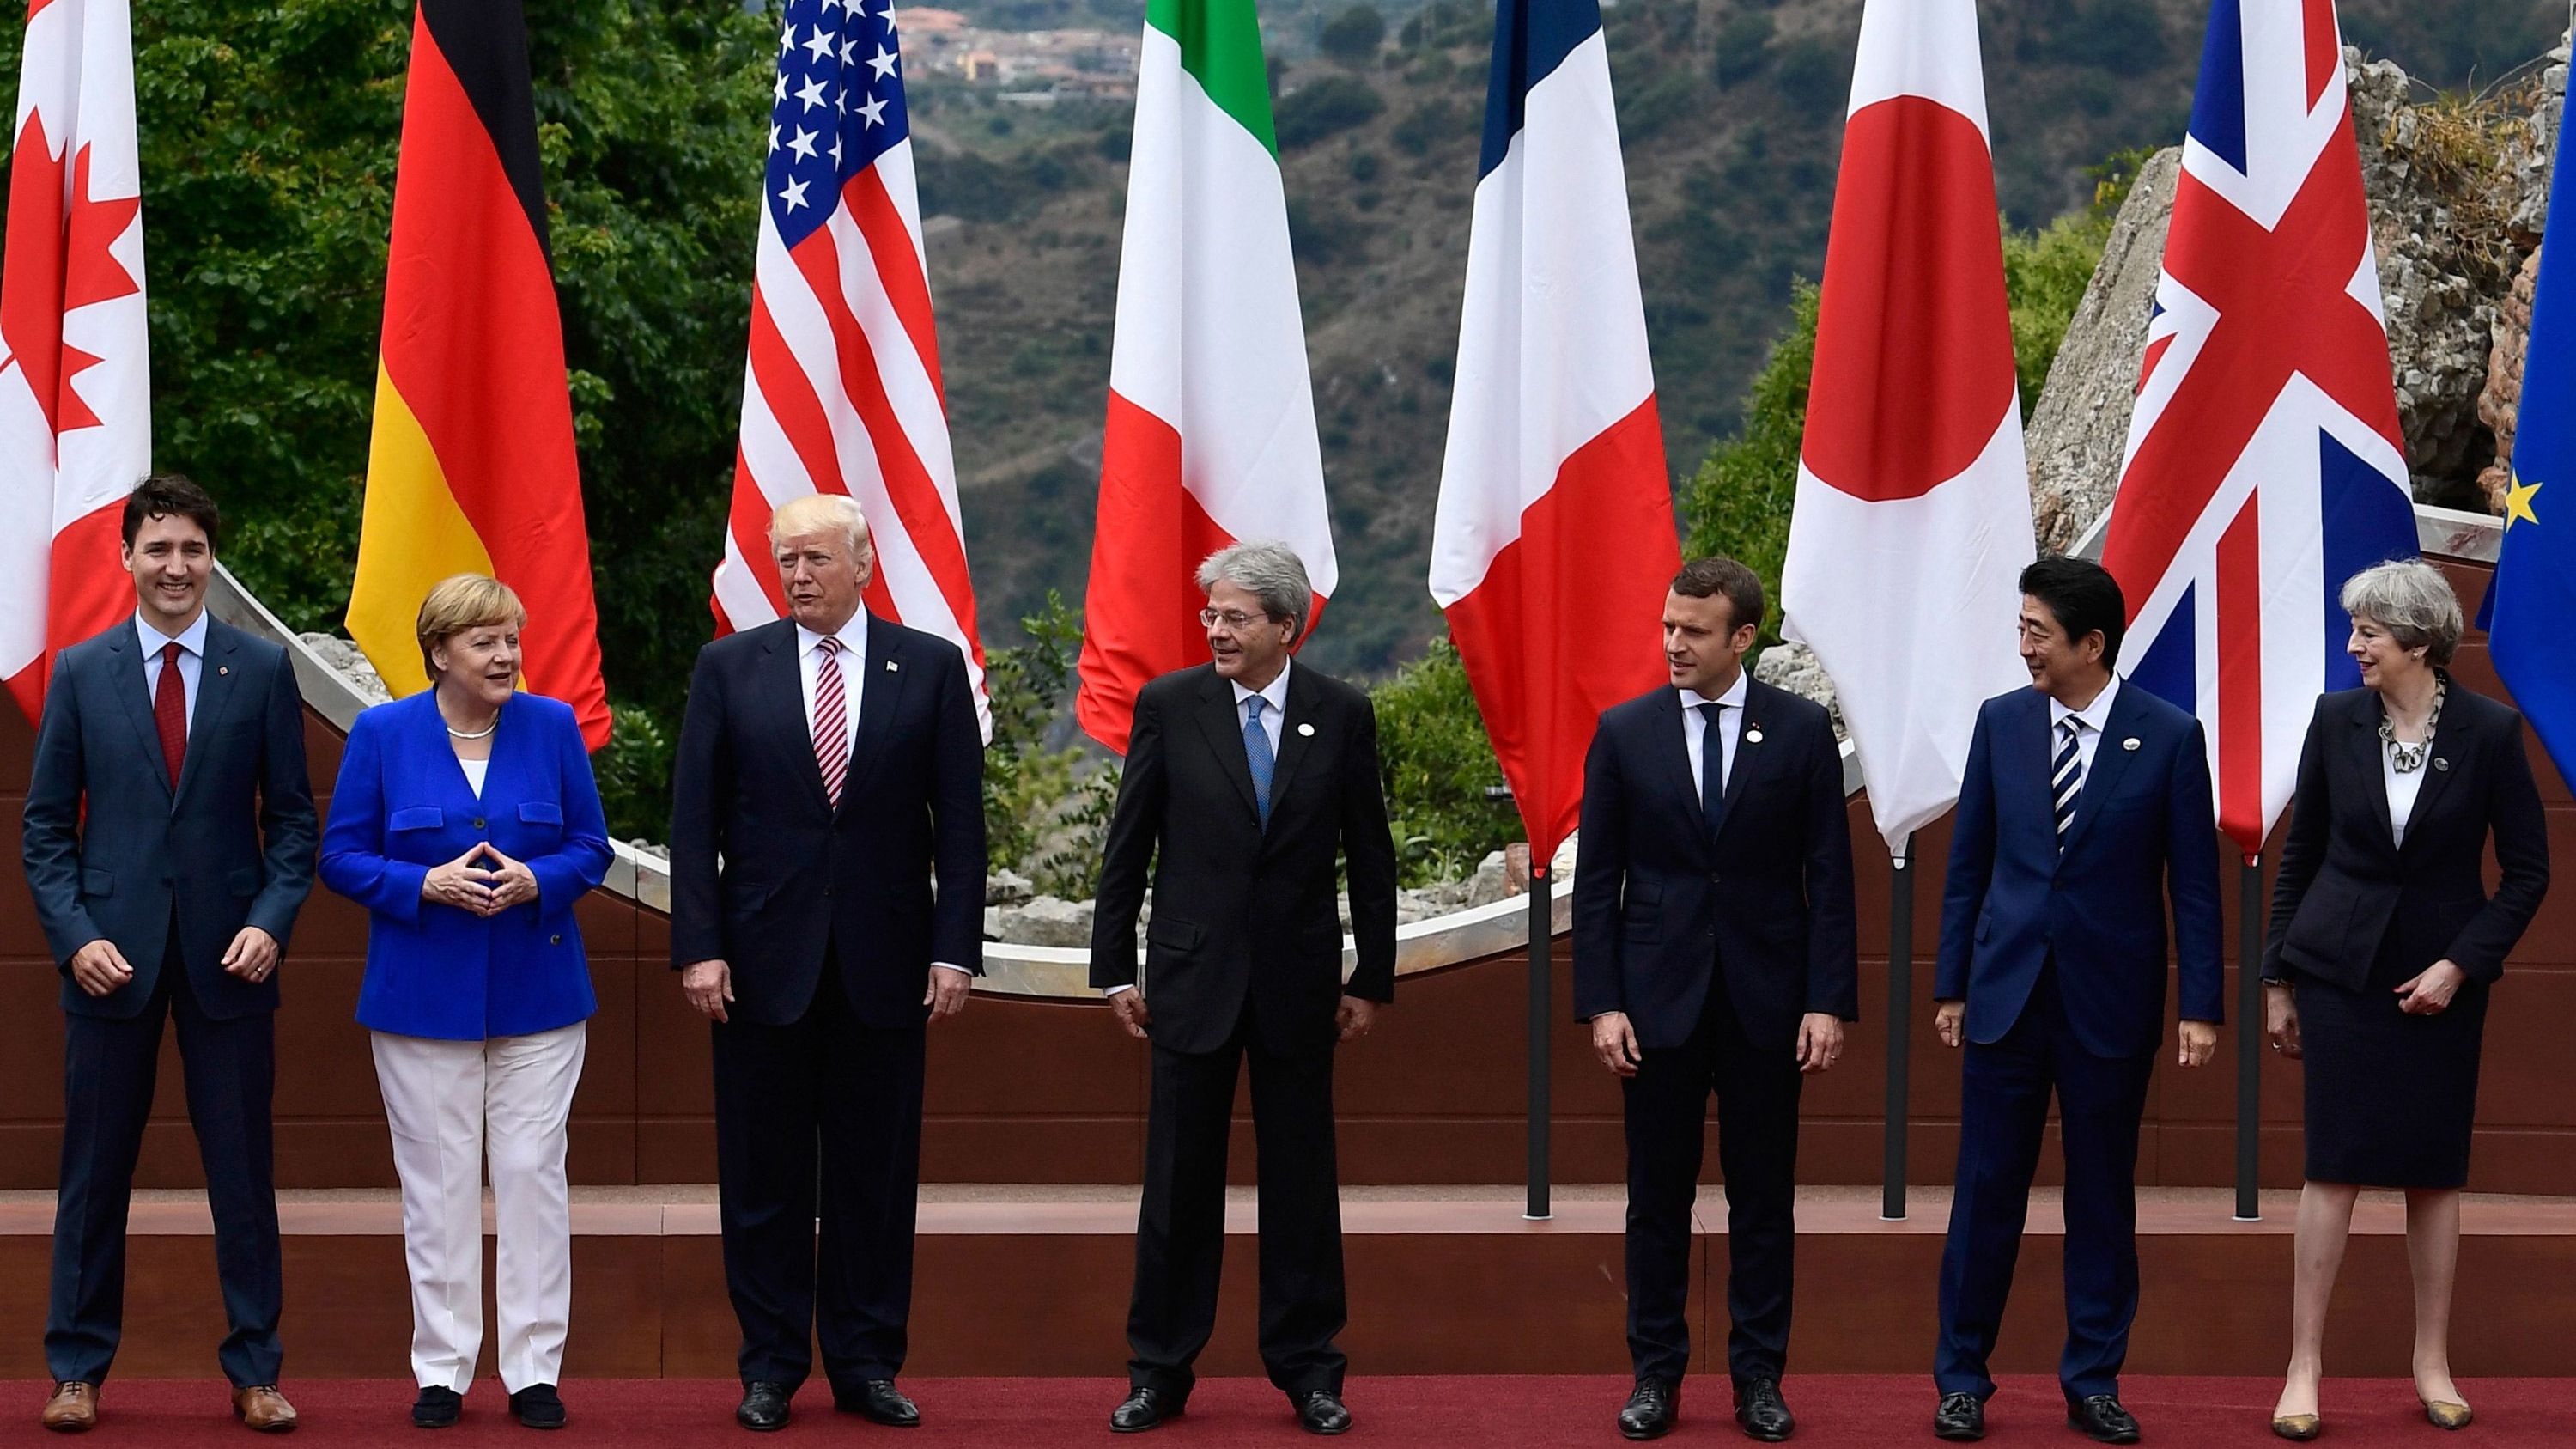 Canadian Prime Minister Justin Trudeau, German Chancellor Angela Merkel, US President Donald Trump, Italian Prime Minister Paolo Gentiloni, French President Emmanuel Macron, Japanese Prime Minister Shinzo Abe, and Britain's Prime Minister Theresa May at the G7 summit, held at the ancient Greek Theatre of Taormina, Sicily on May 26, 2017. 

Image Souce: CNN 